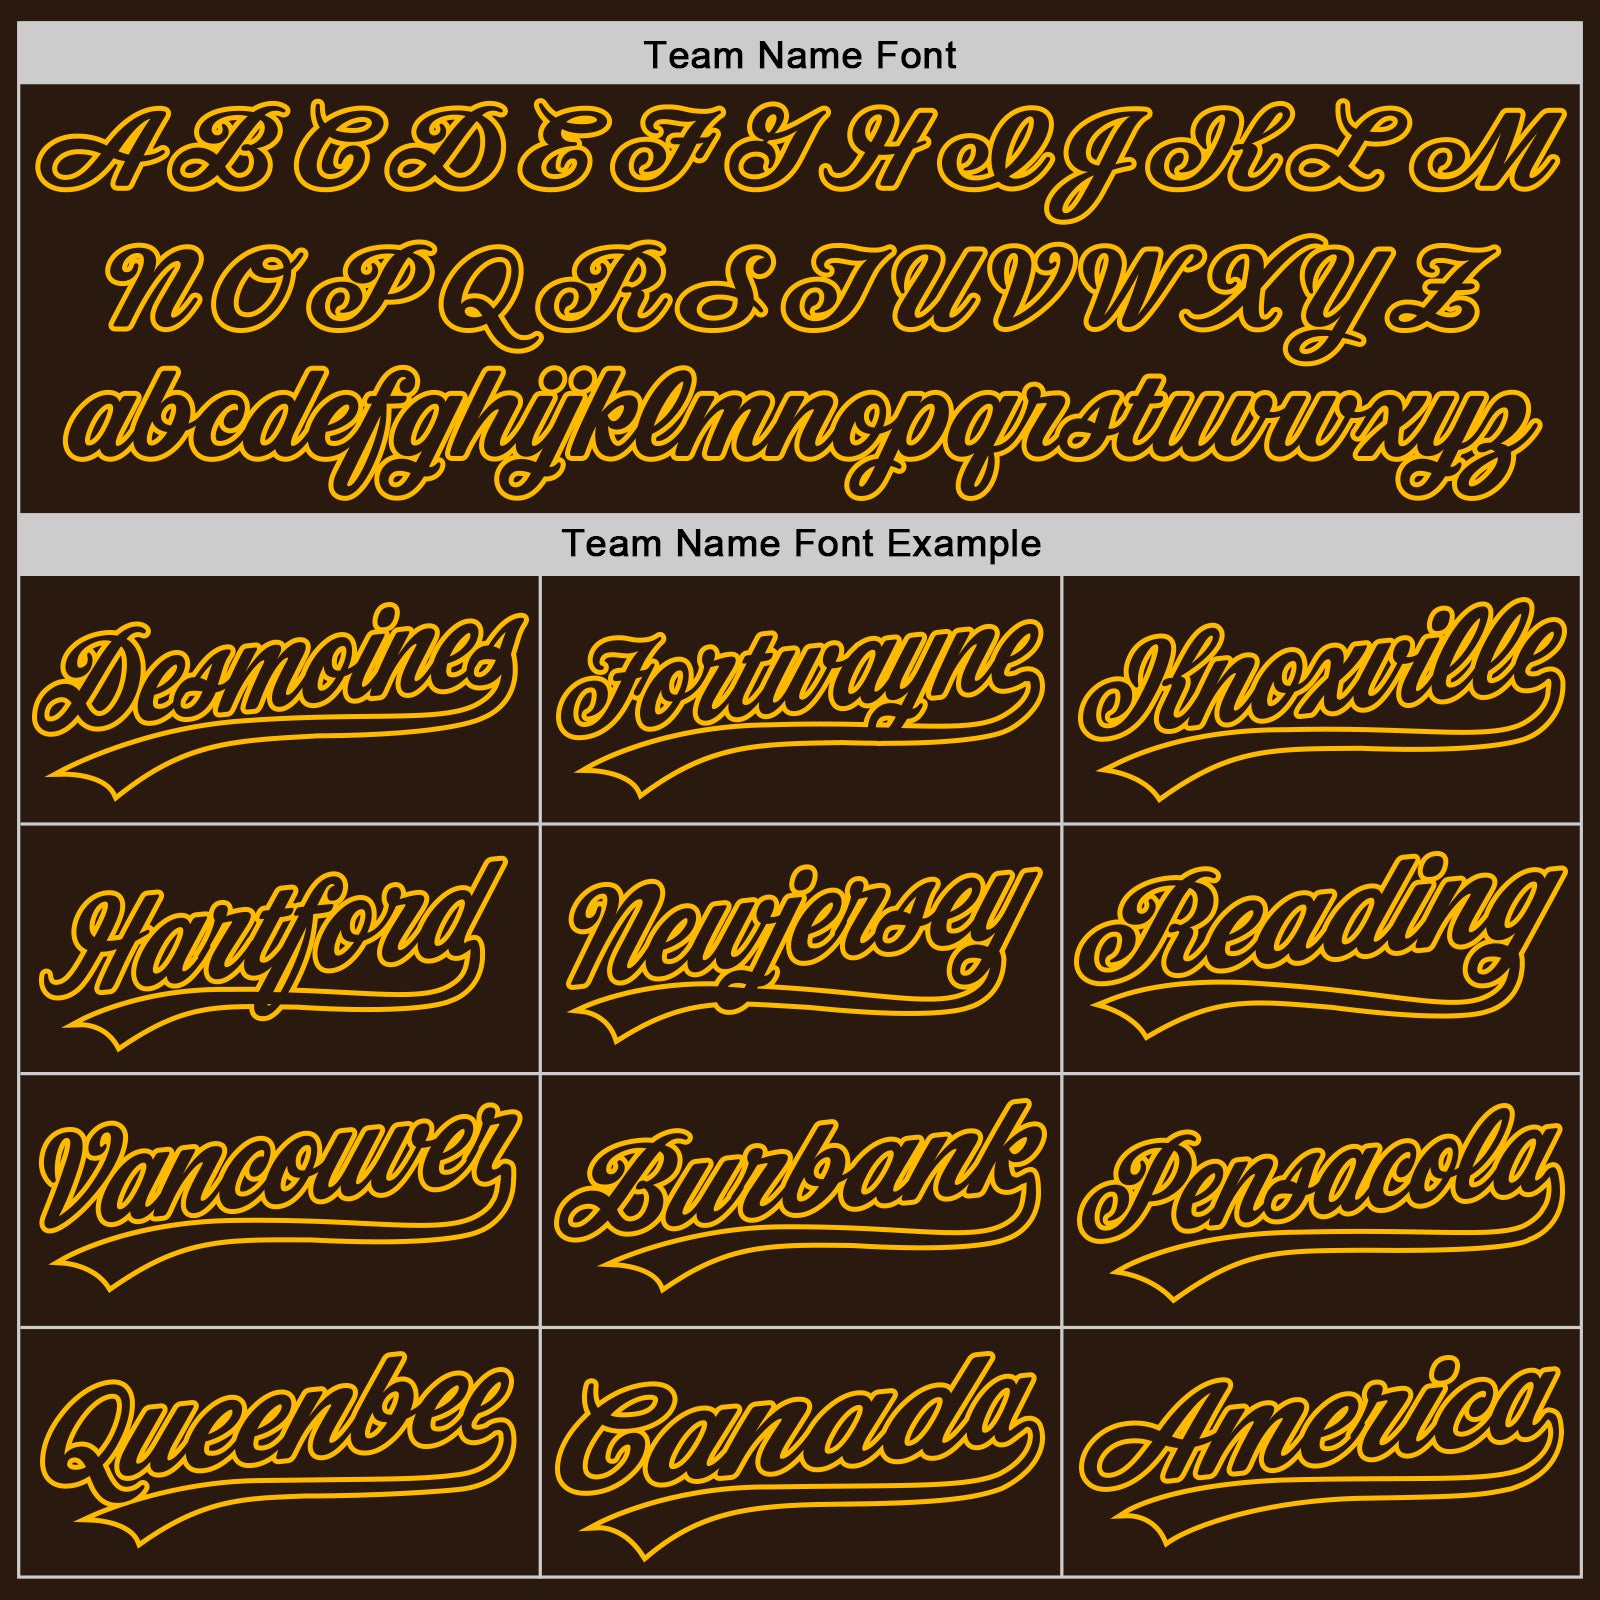 Custom Brown Gold 3D Pattern Design Curve Lines Authentic Baseball Jersey